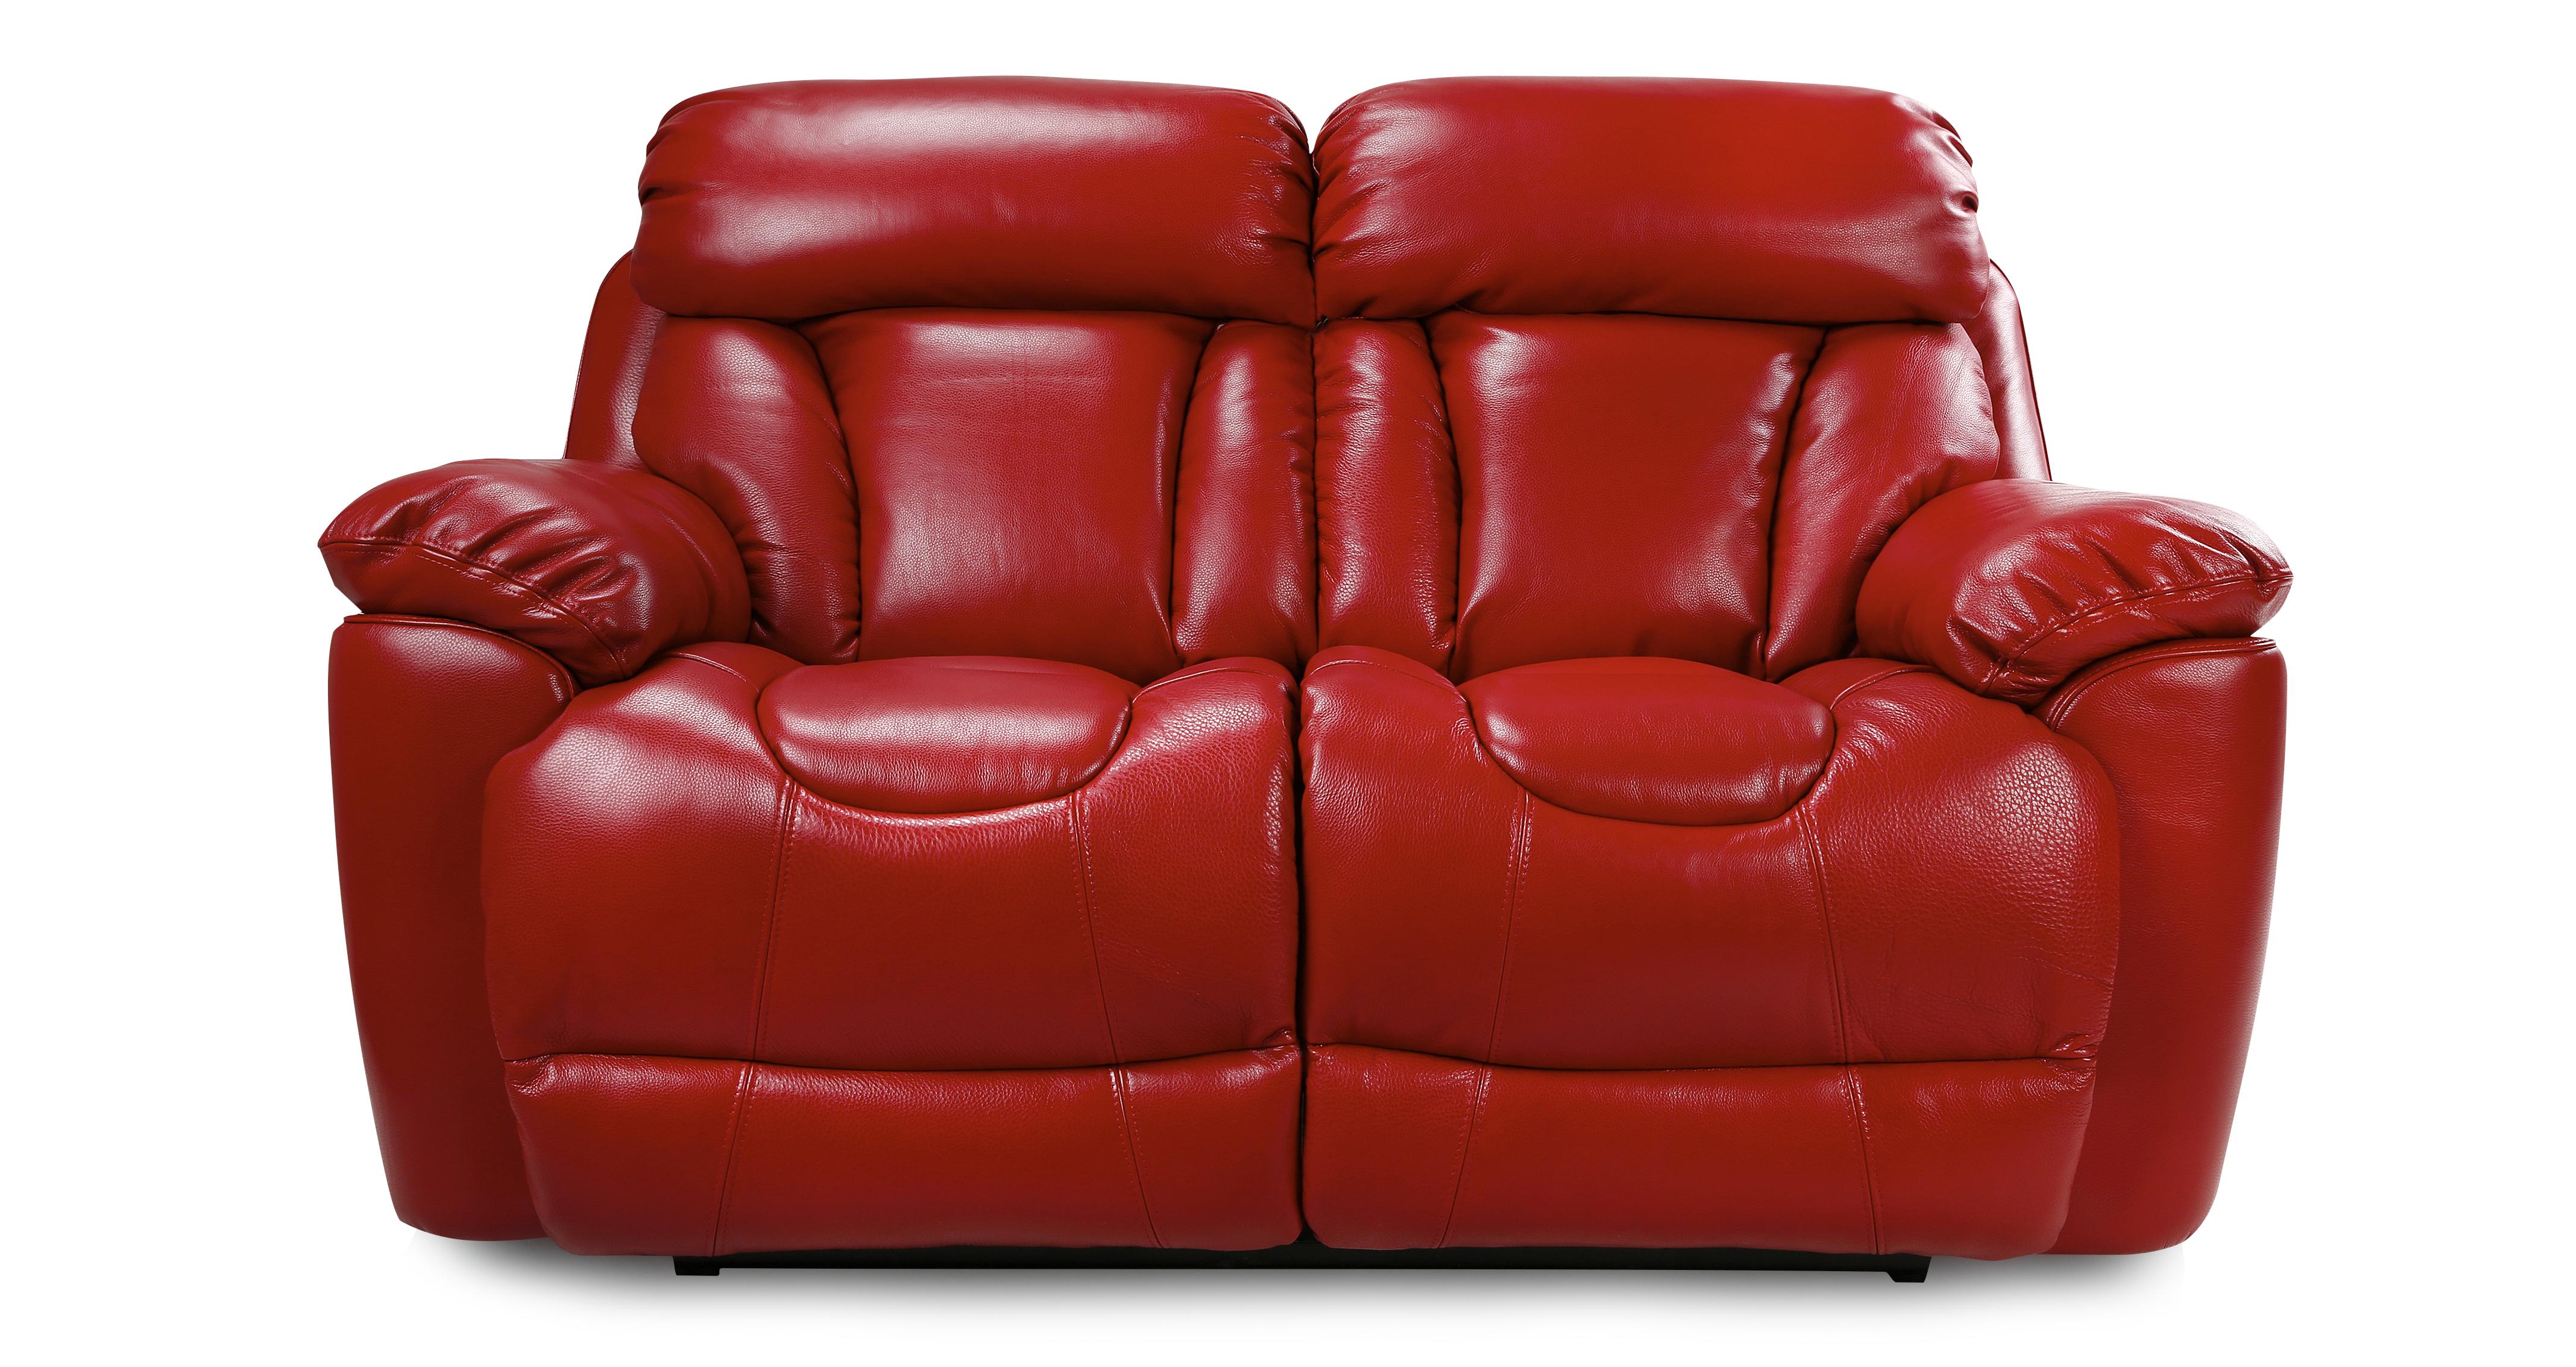 2 seater red leather recliner sofa